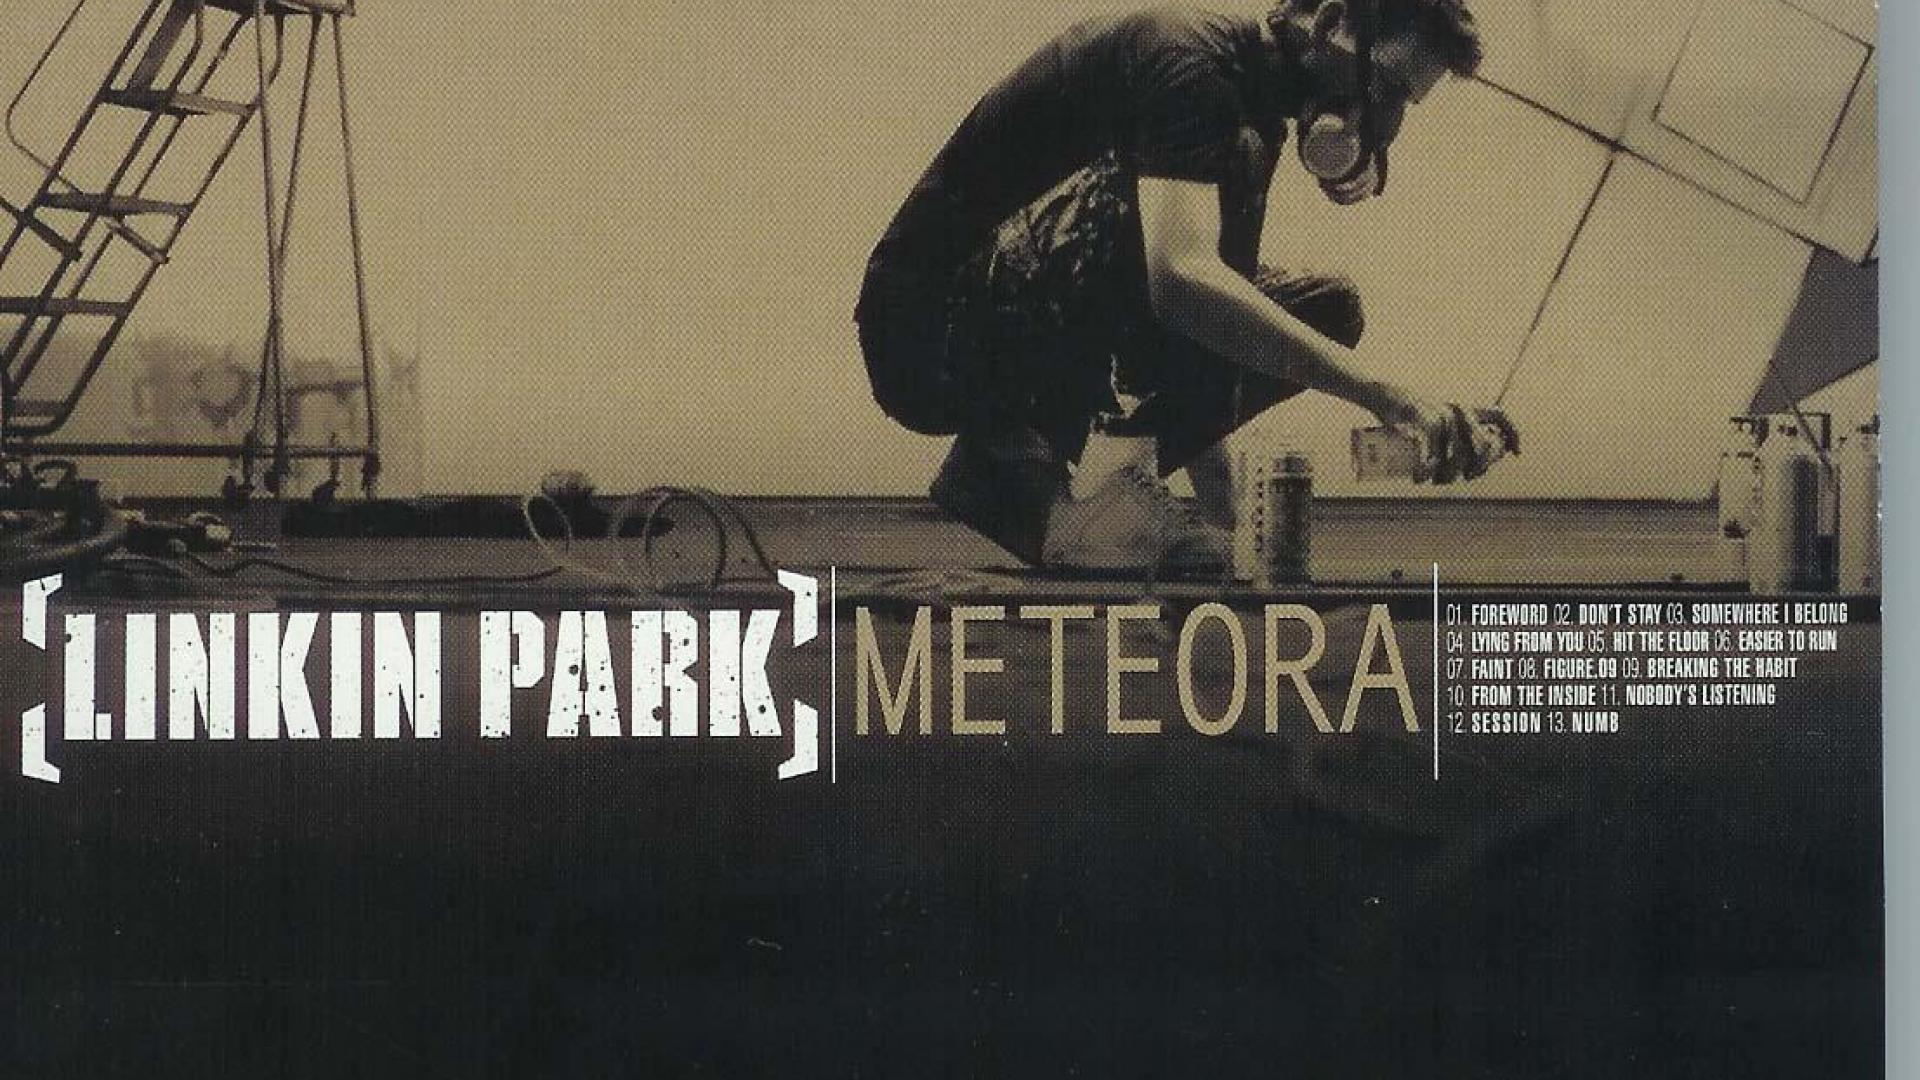 Linkin Park Meteora High Quality And Resolution